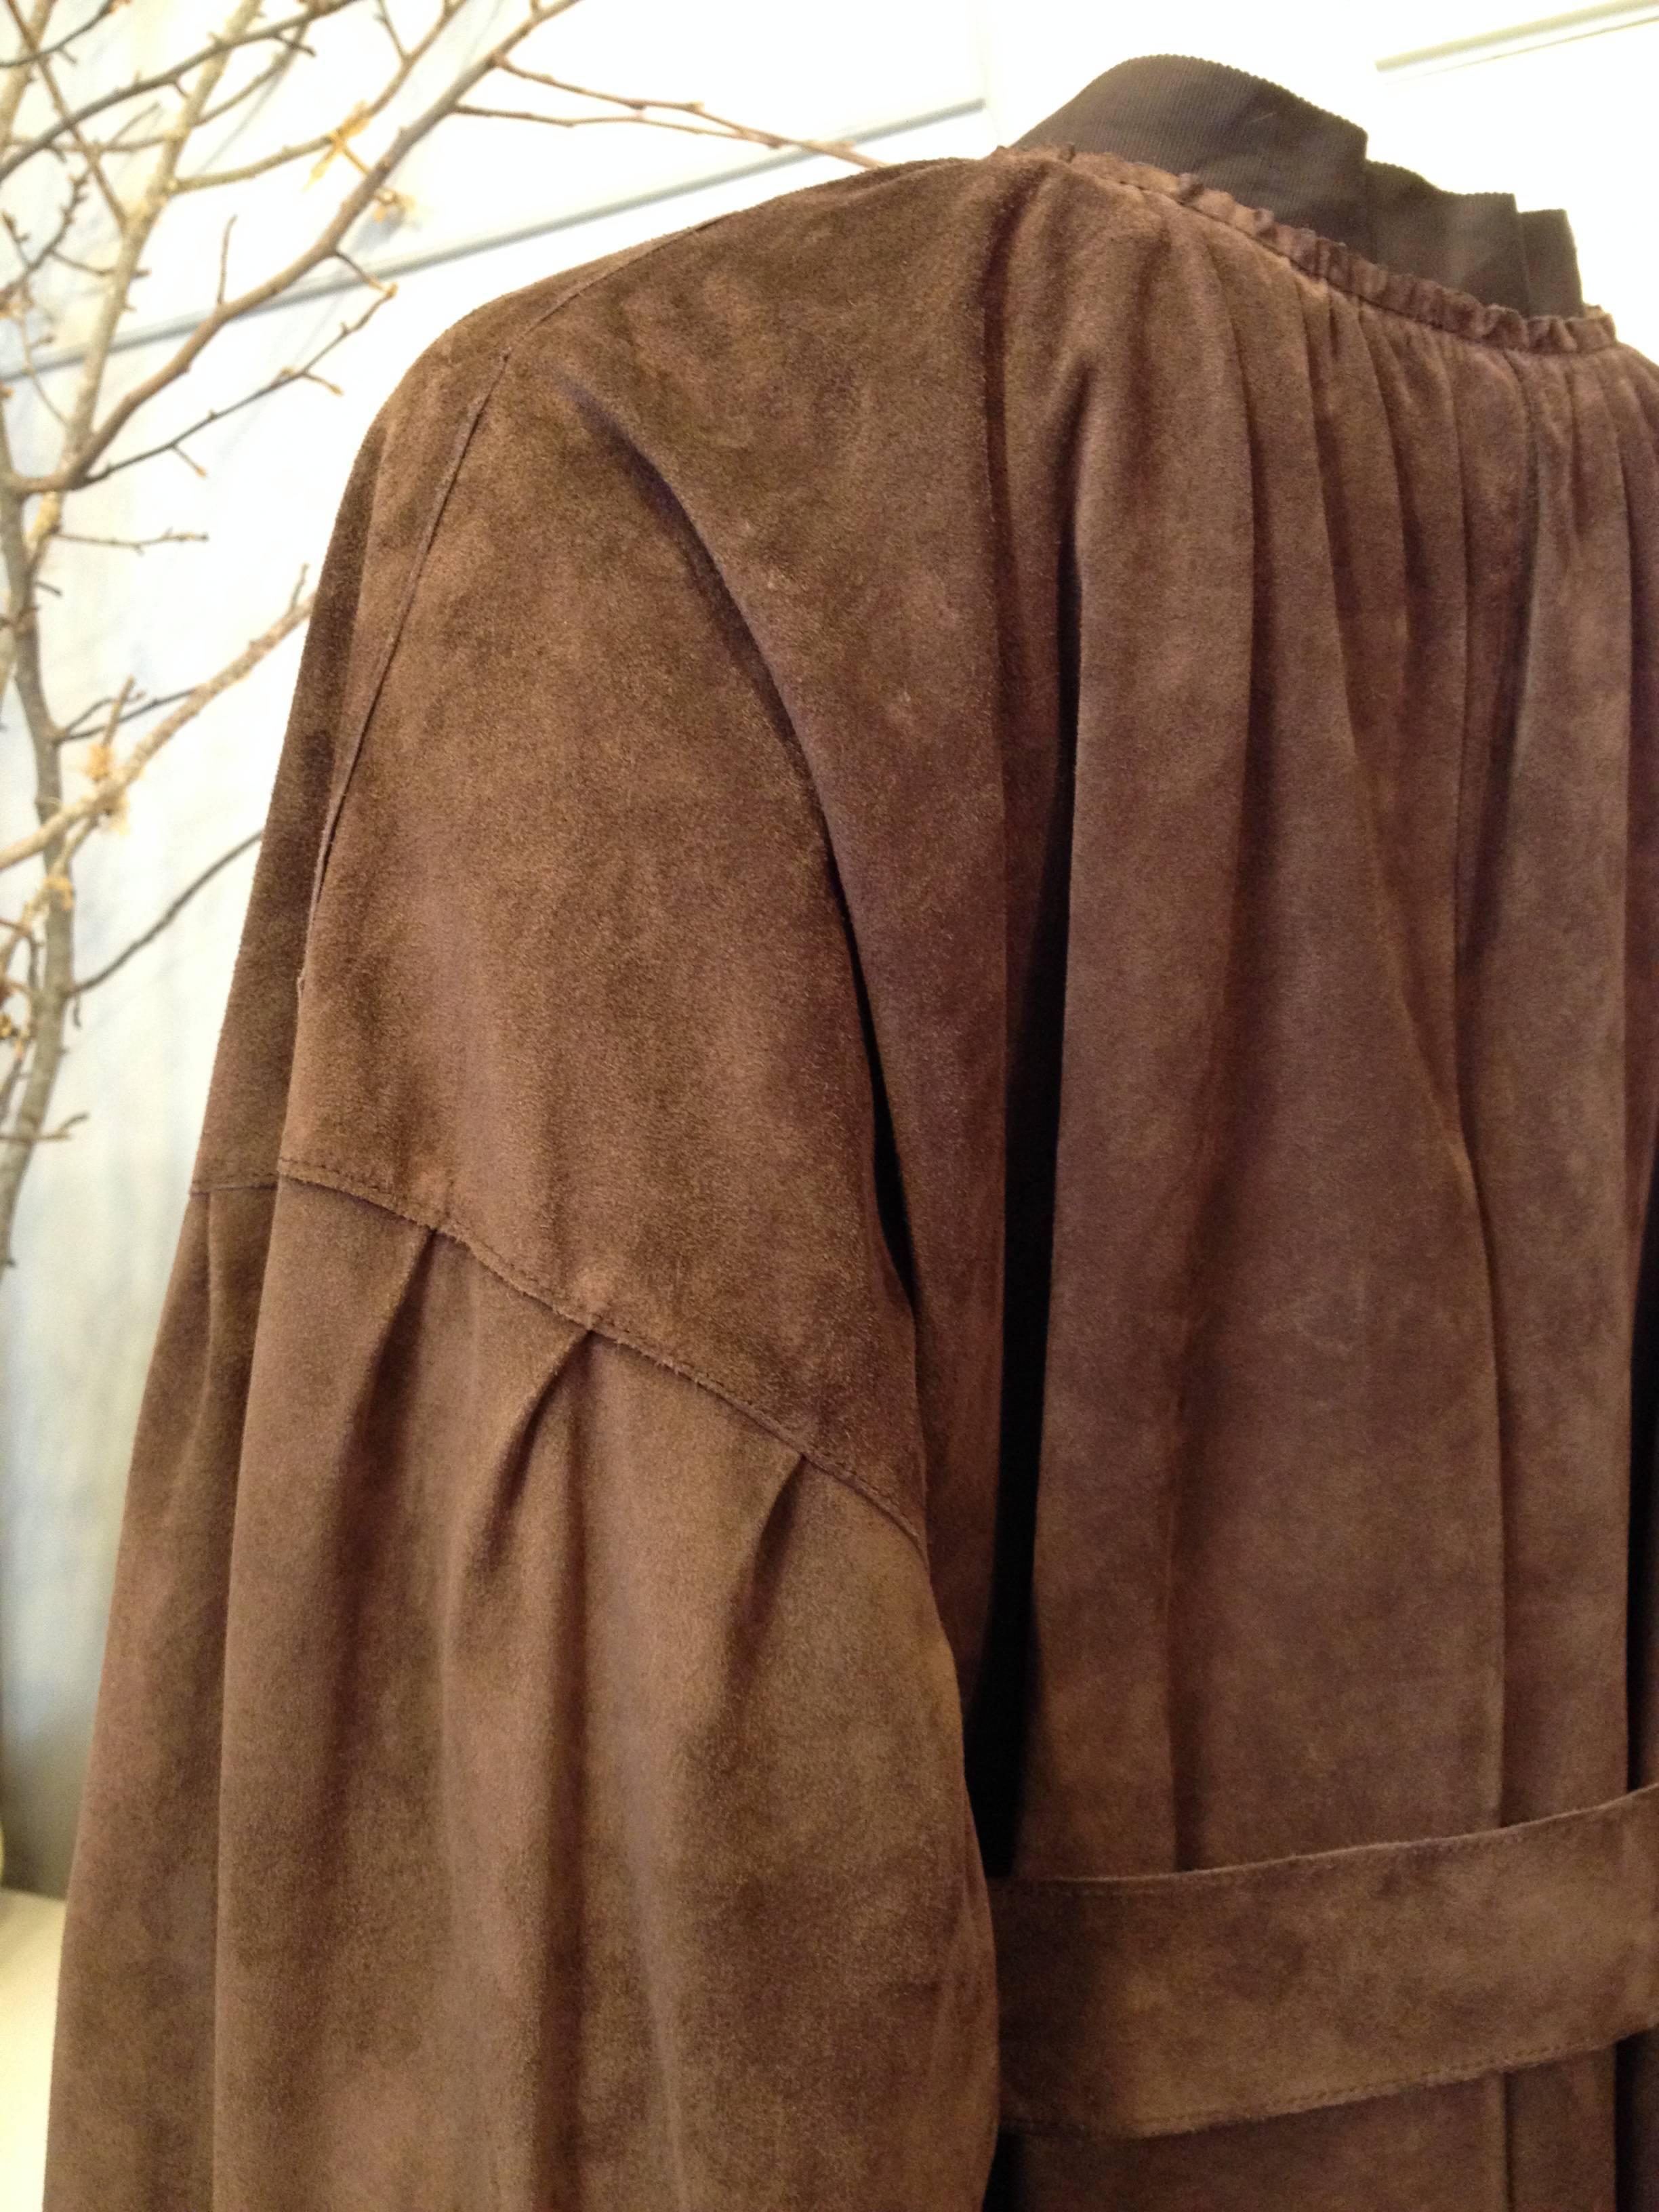 Women's Lanvin Brown Suede Belted Coat Size 38 (6) For Sale